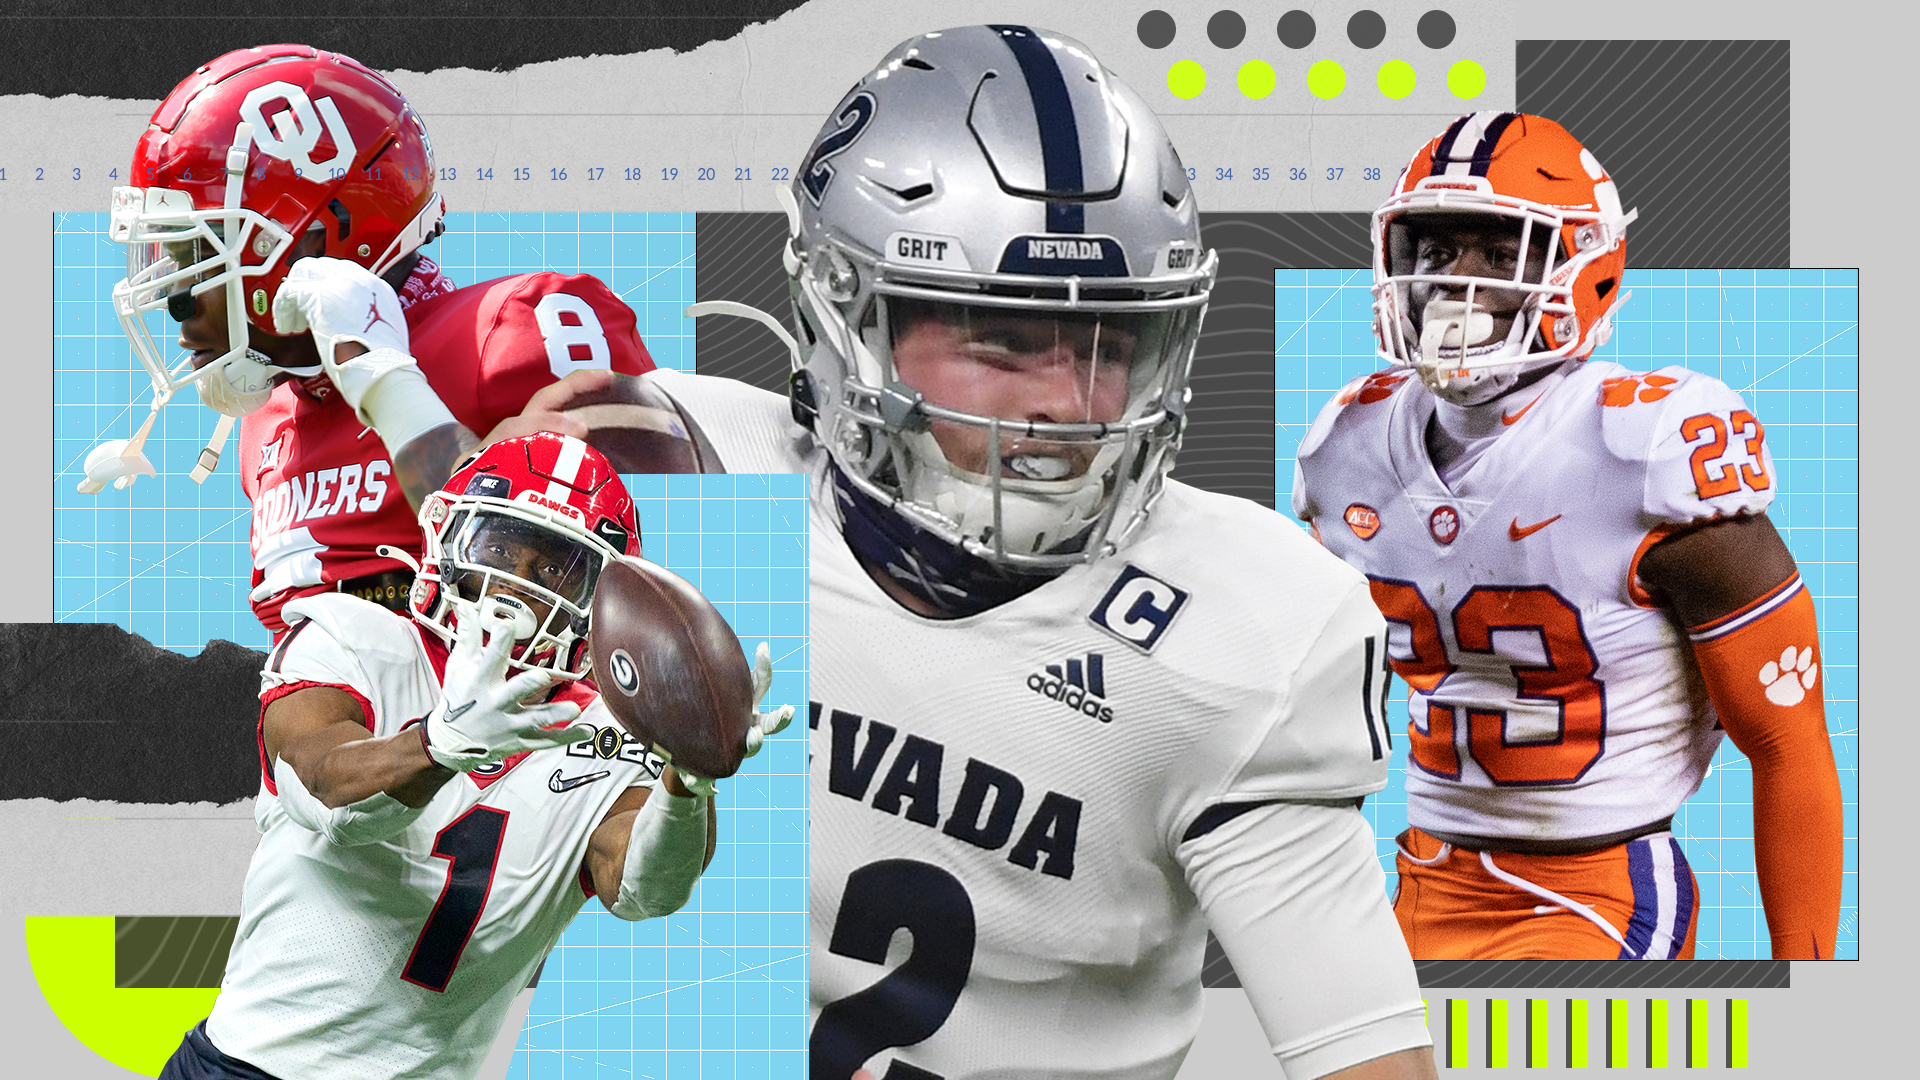 nfl mock draft 2022 all 7 rounds